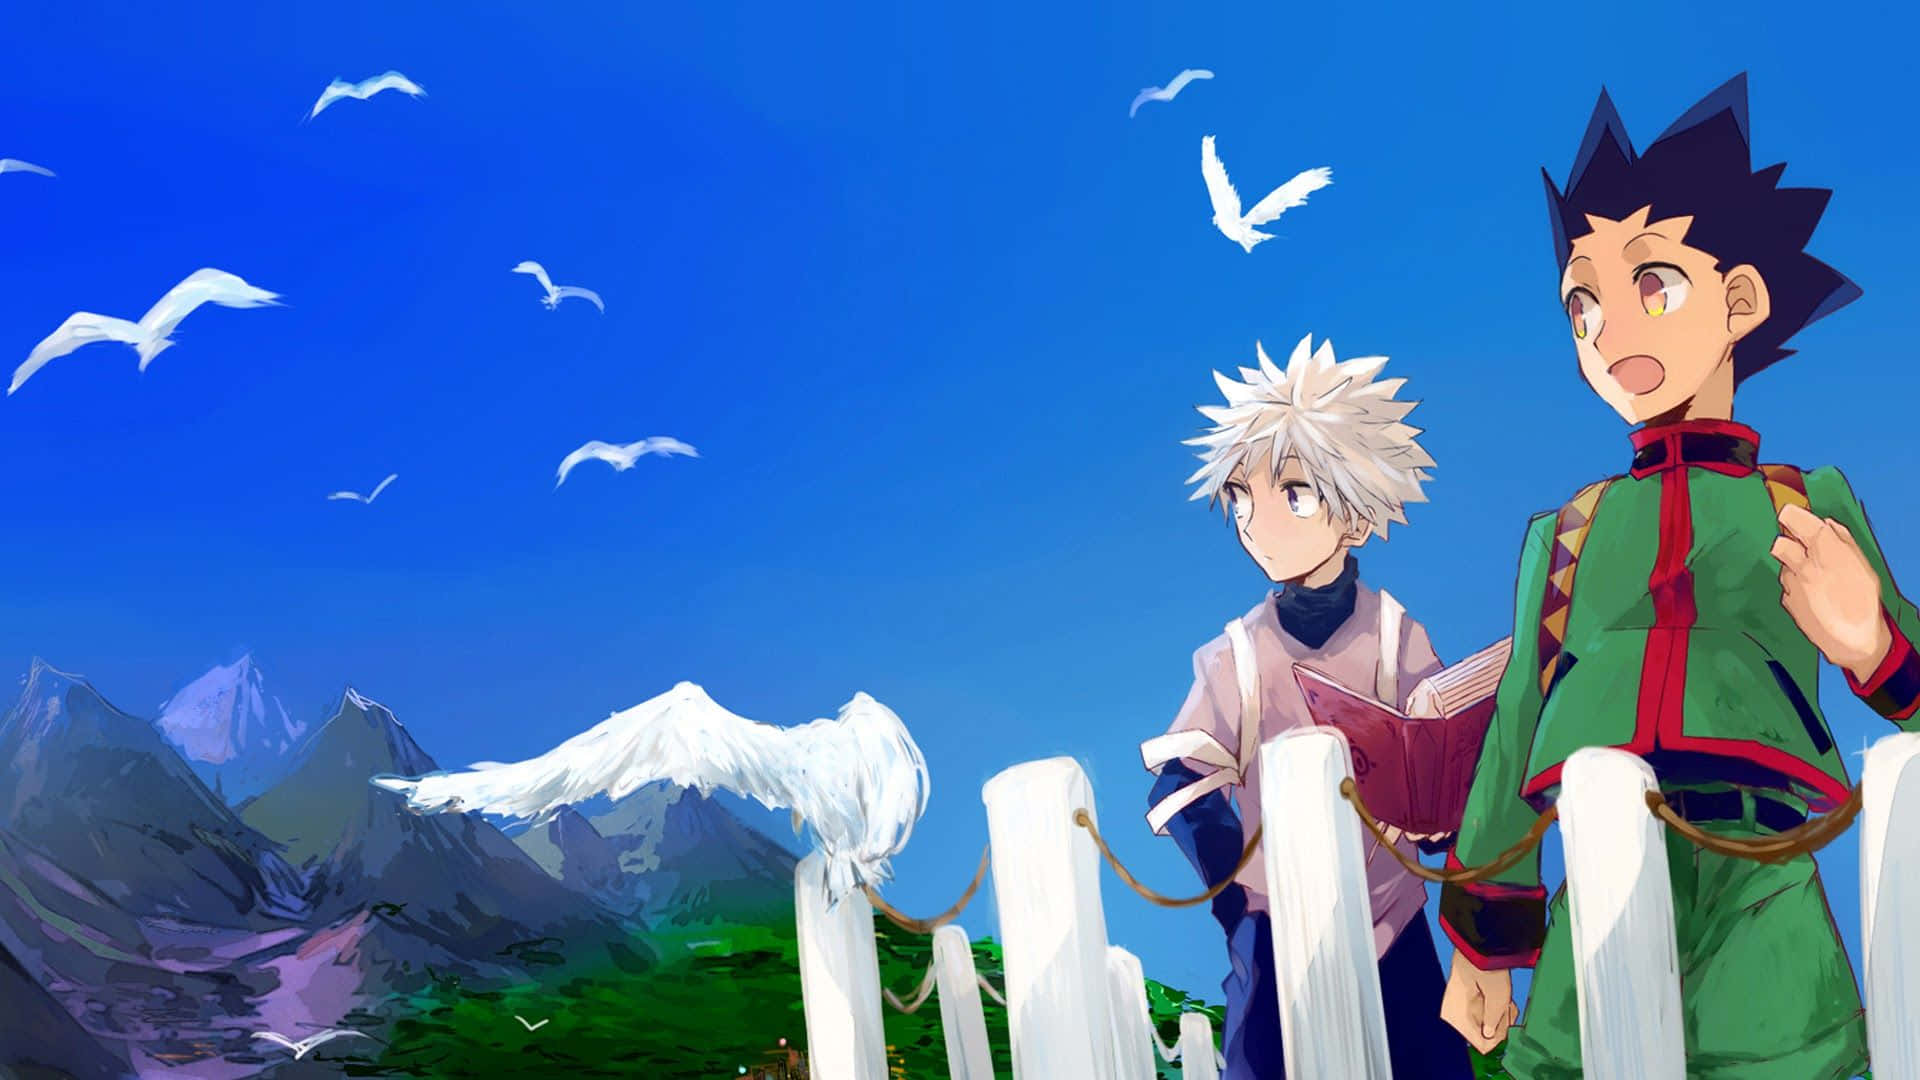 Best friends Gon and Killua - two young fighters embarking on an exciting adventure! Wallpaper